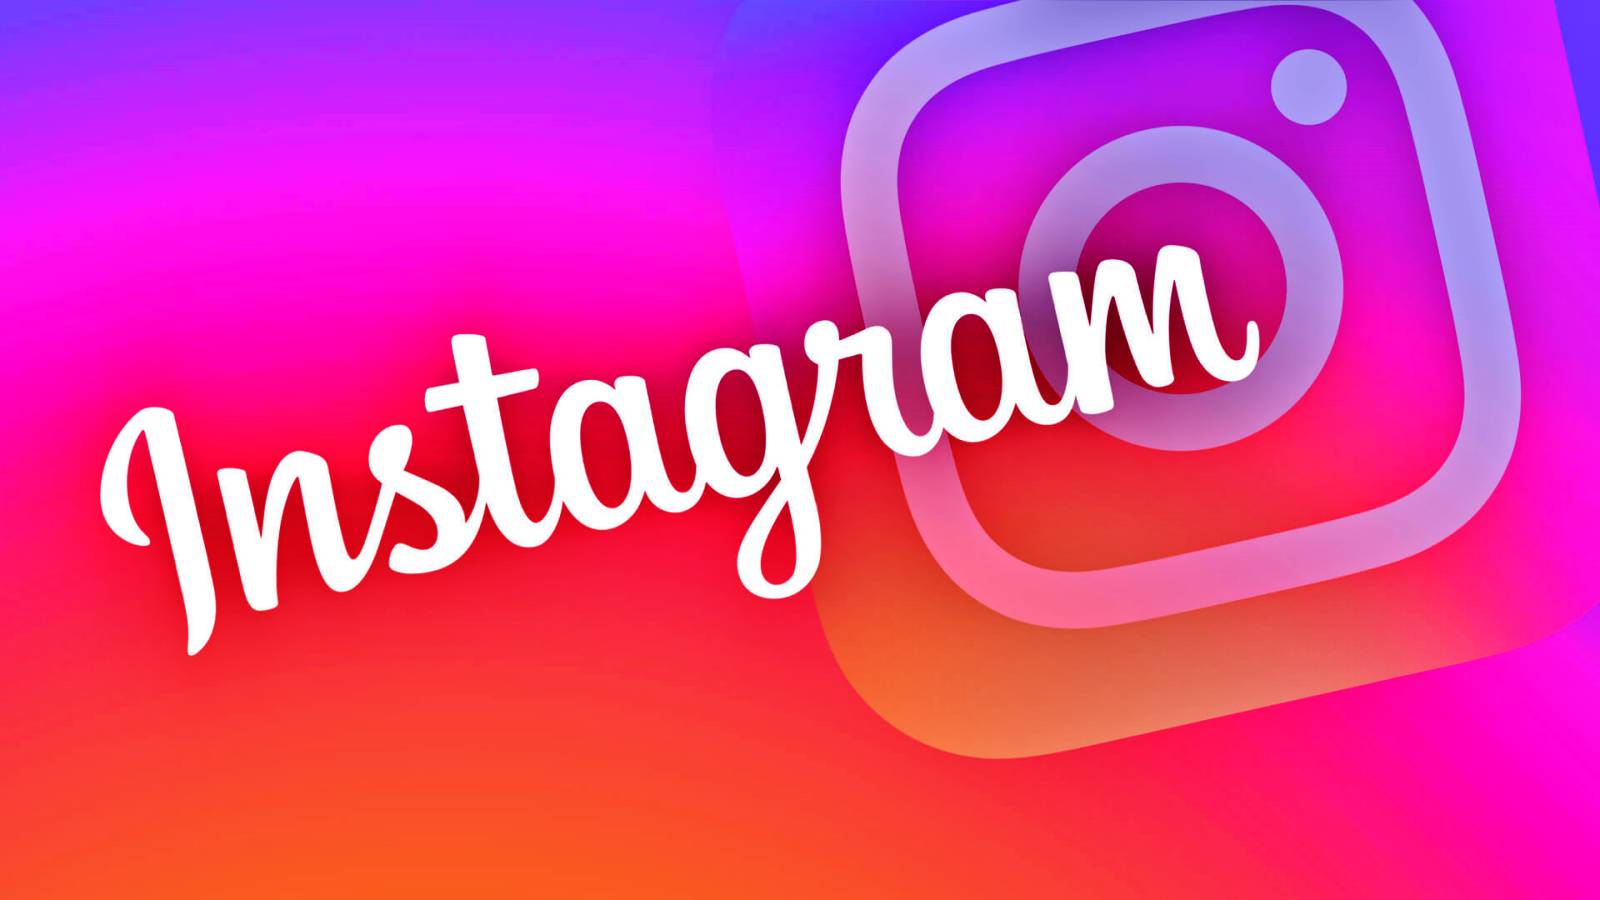 Instagram Update is Now Available for Phones